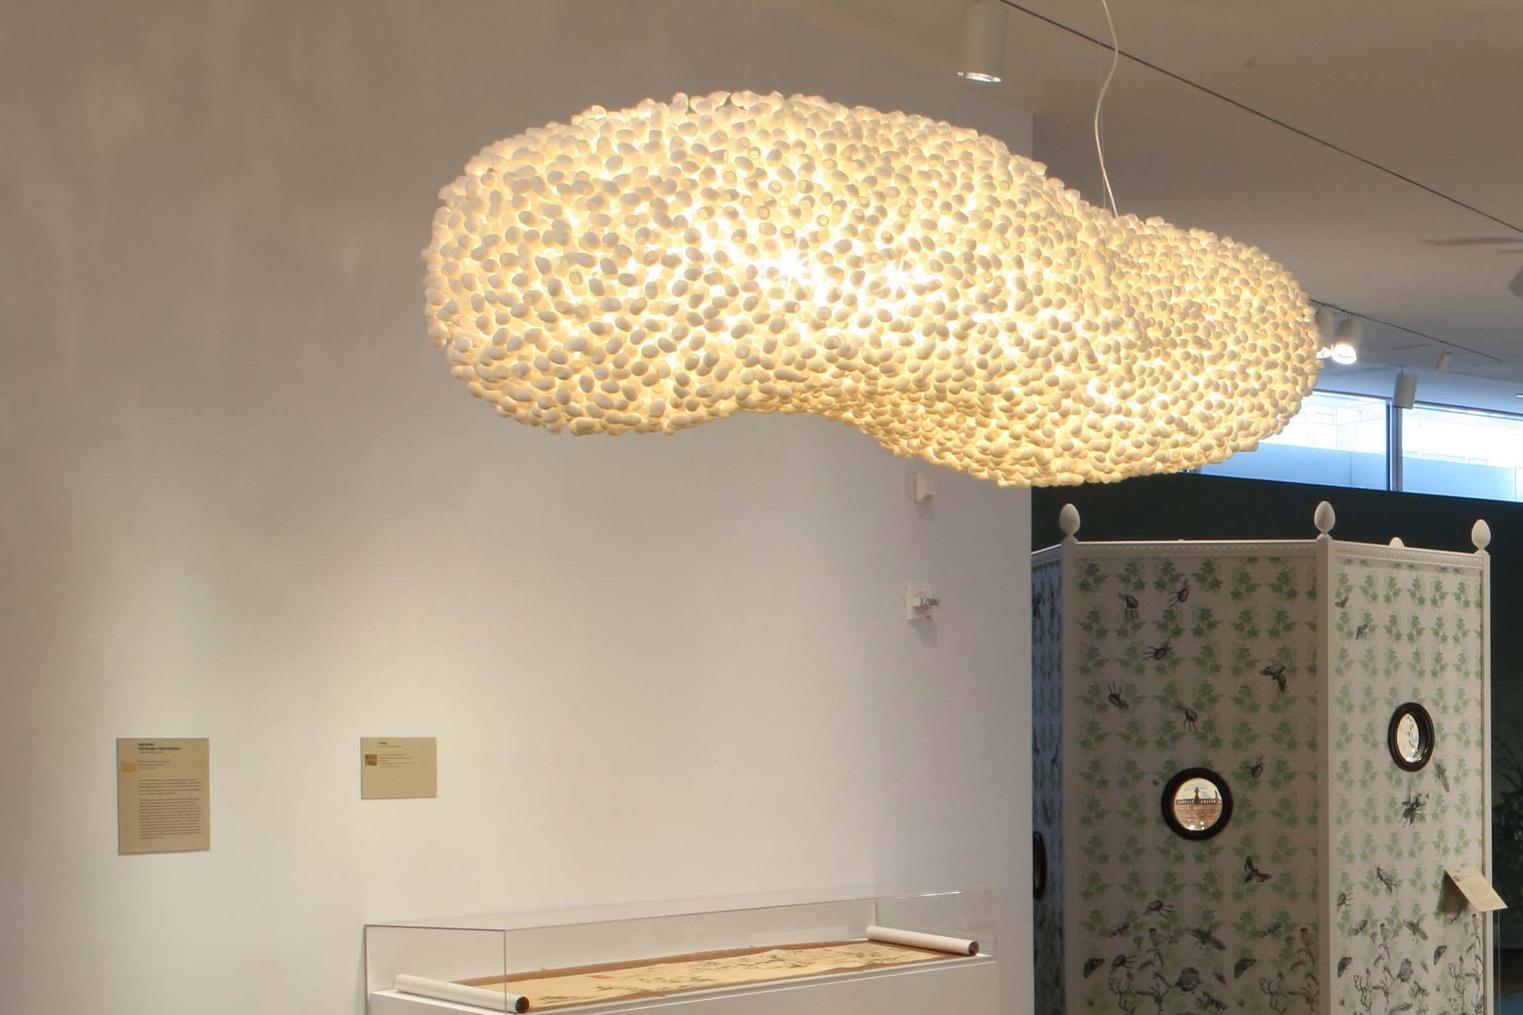 Organic Modern Eight Thousand Miles of Home by Ango, Hand-Crafted Light First Shown at MAD, NYC For Sale